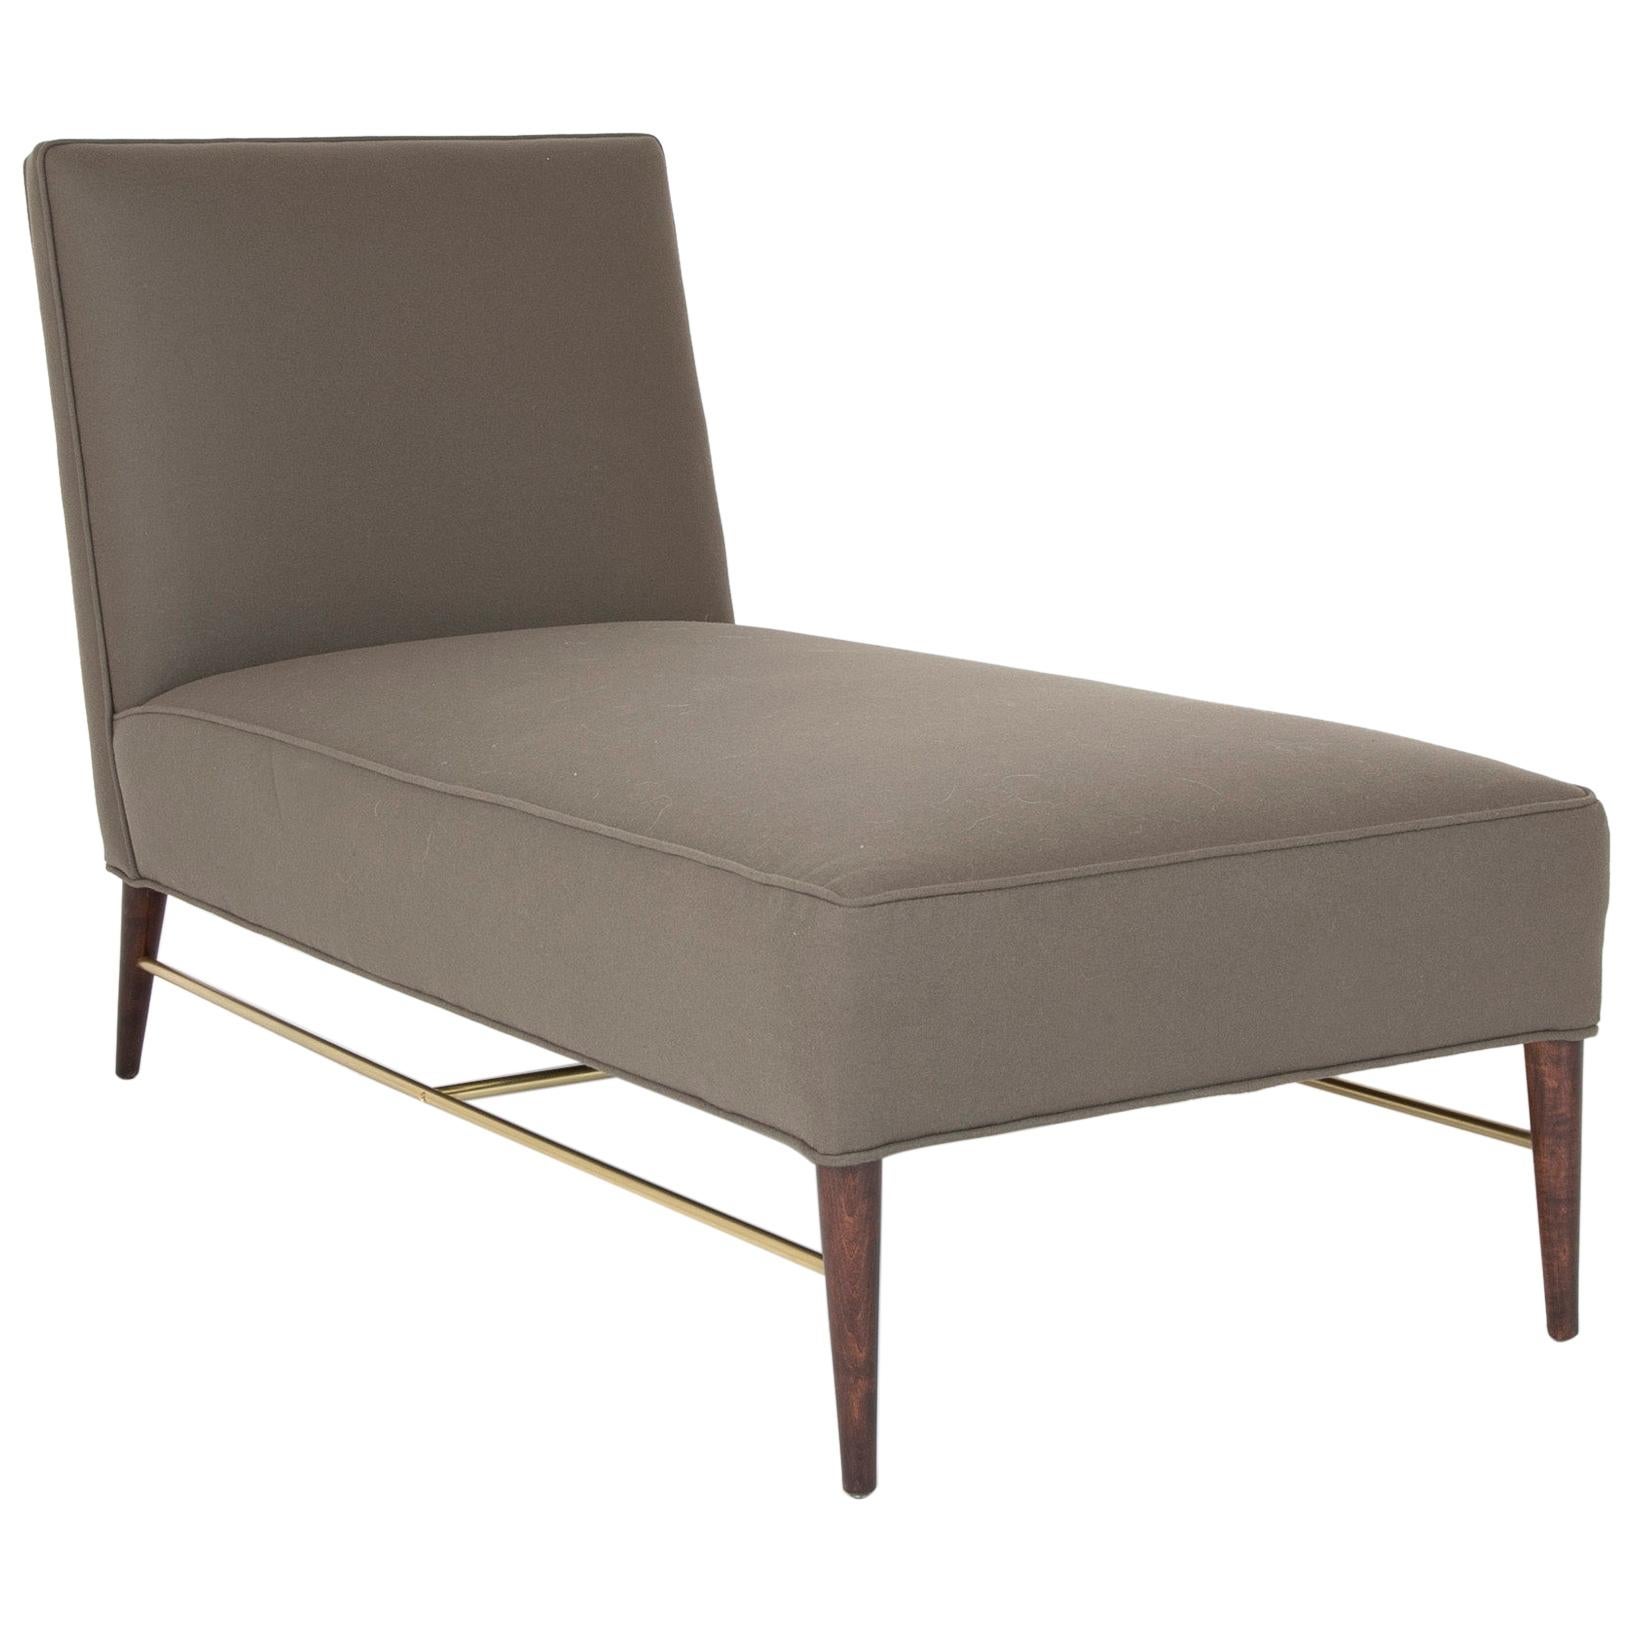 Paul McCobb Mahogany and Brass Chaise Lounge